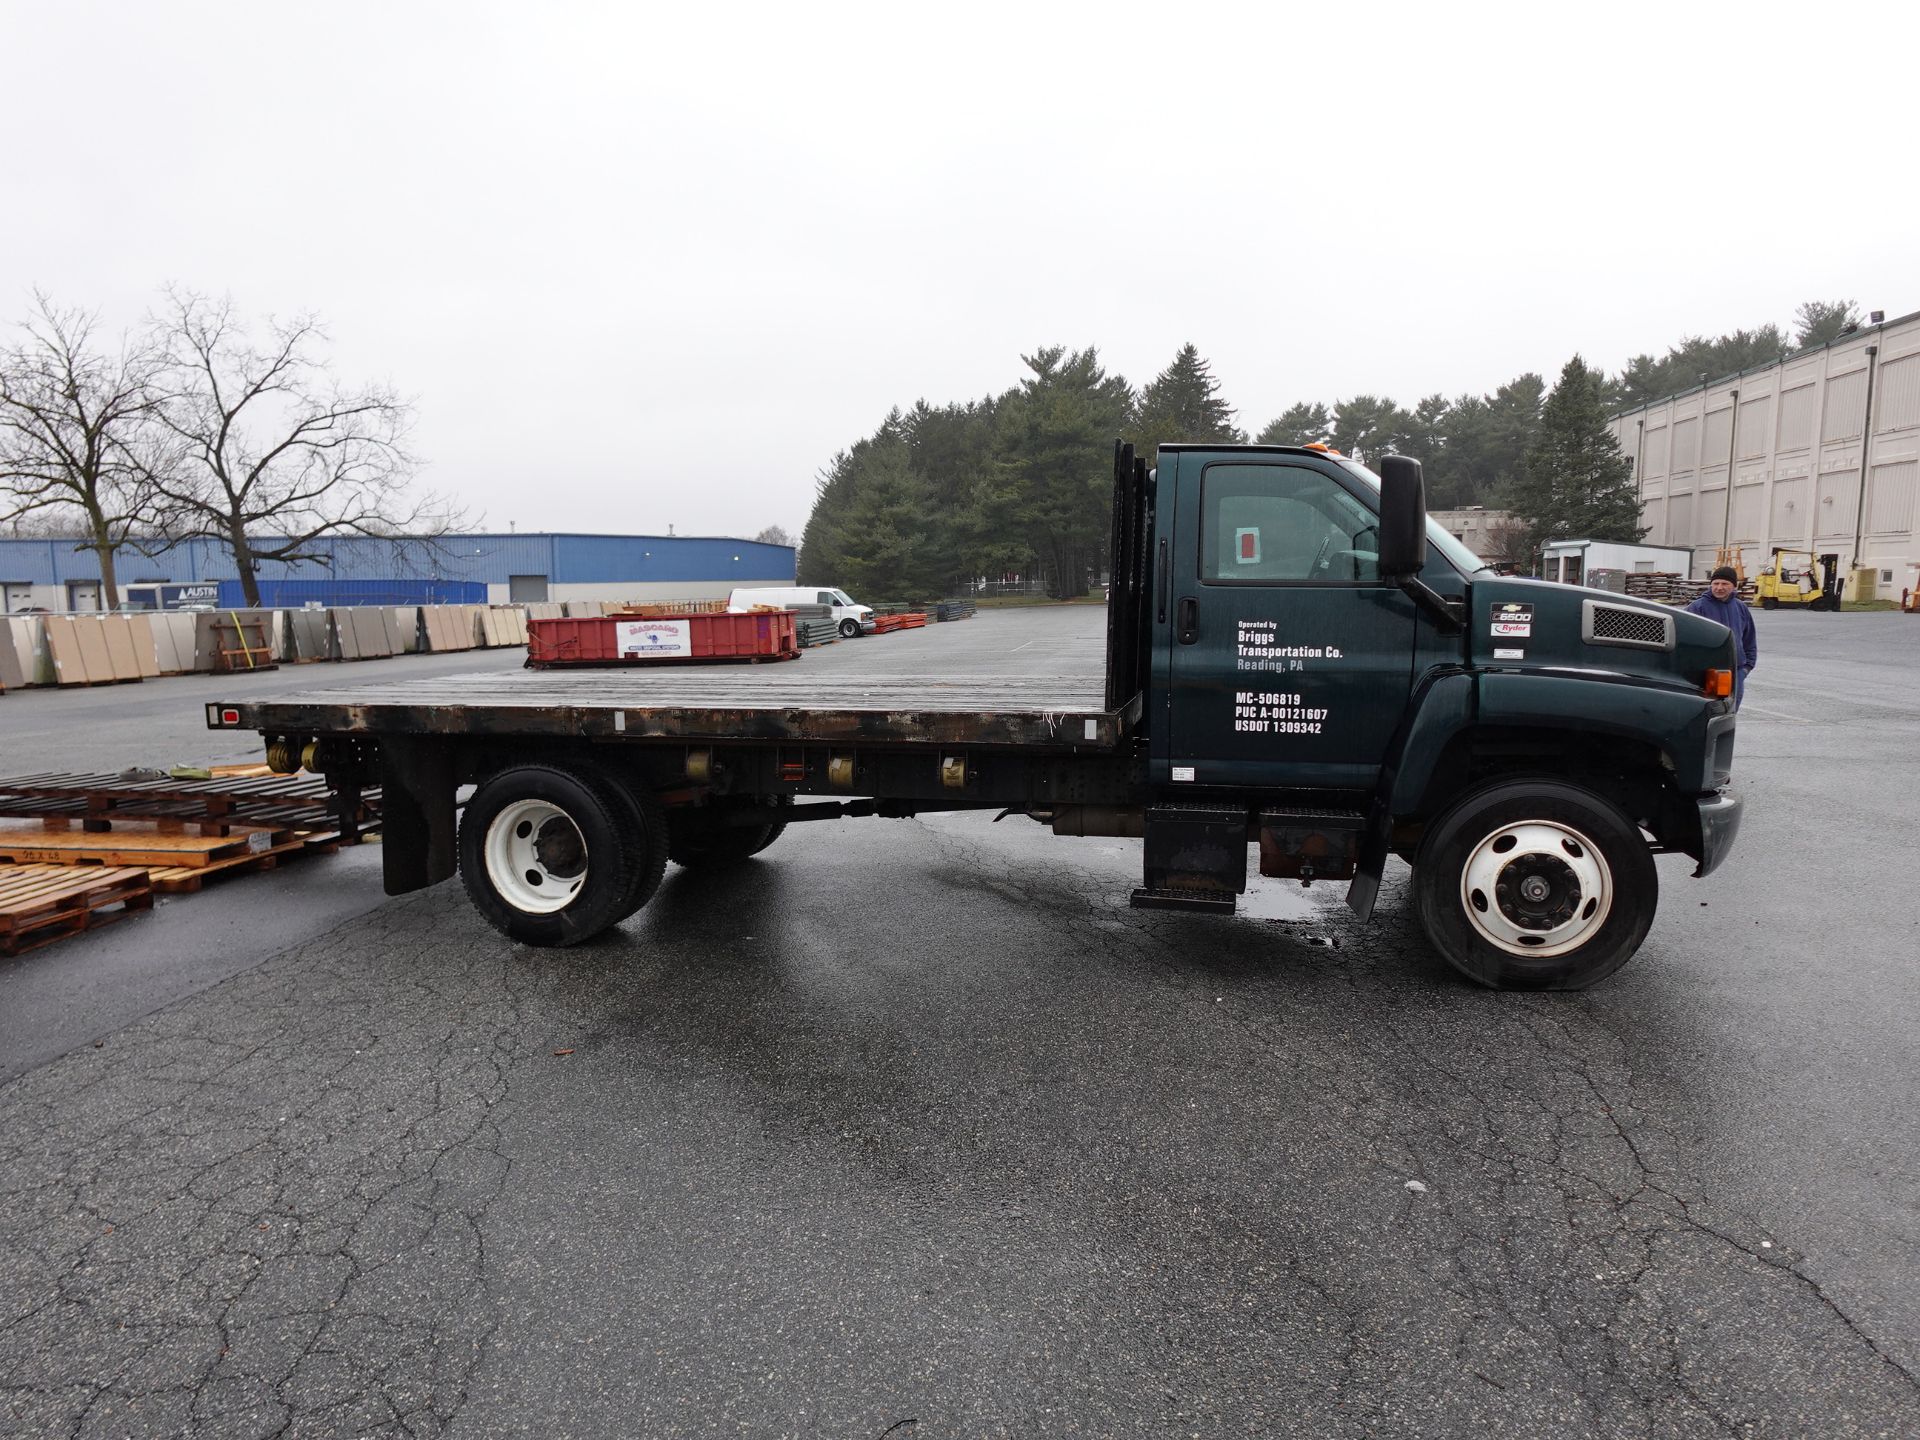 Chevrolet flat bed truck - Image 3 of 6